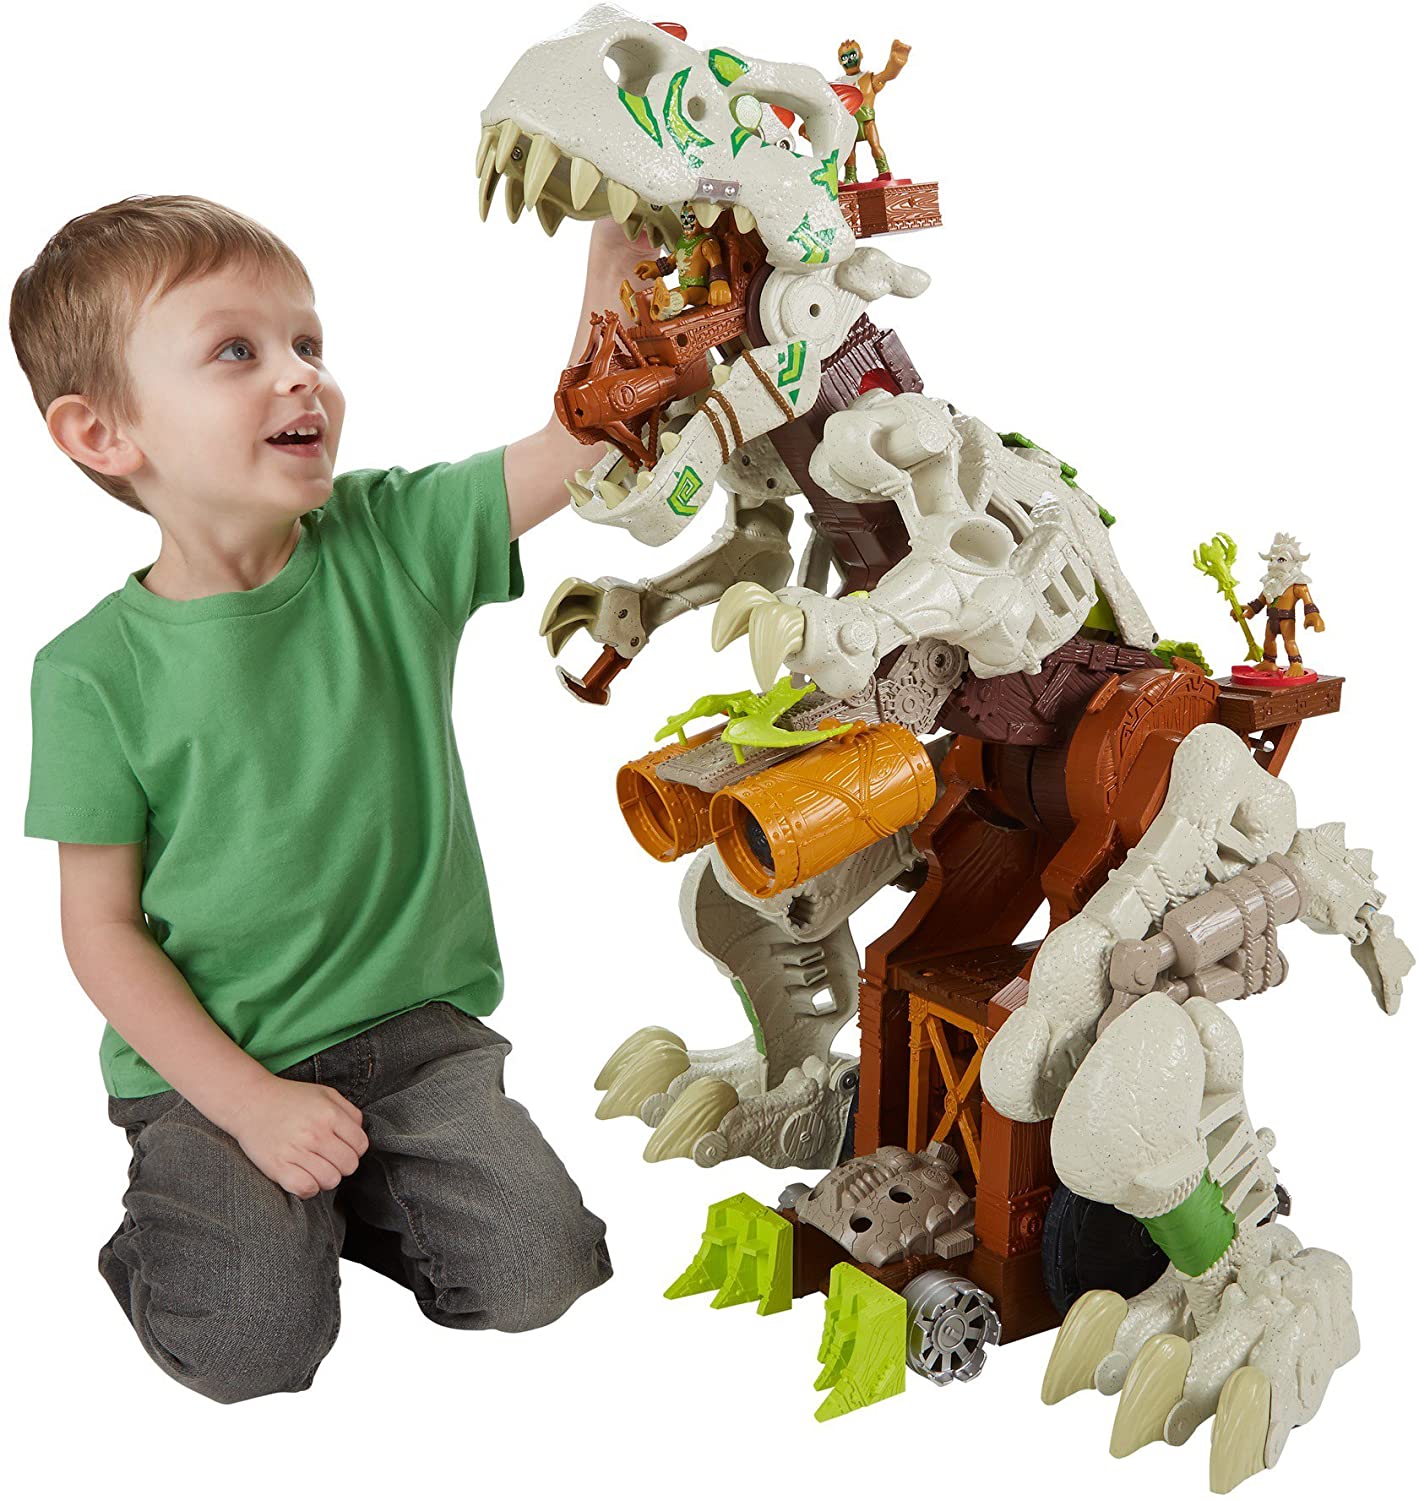 Top 7 Best Robot Dinosaur Toys Reviews in 2022 5